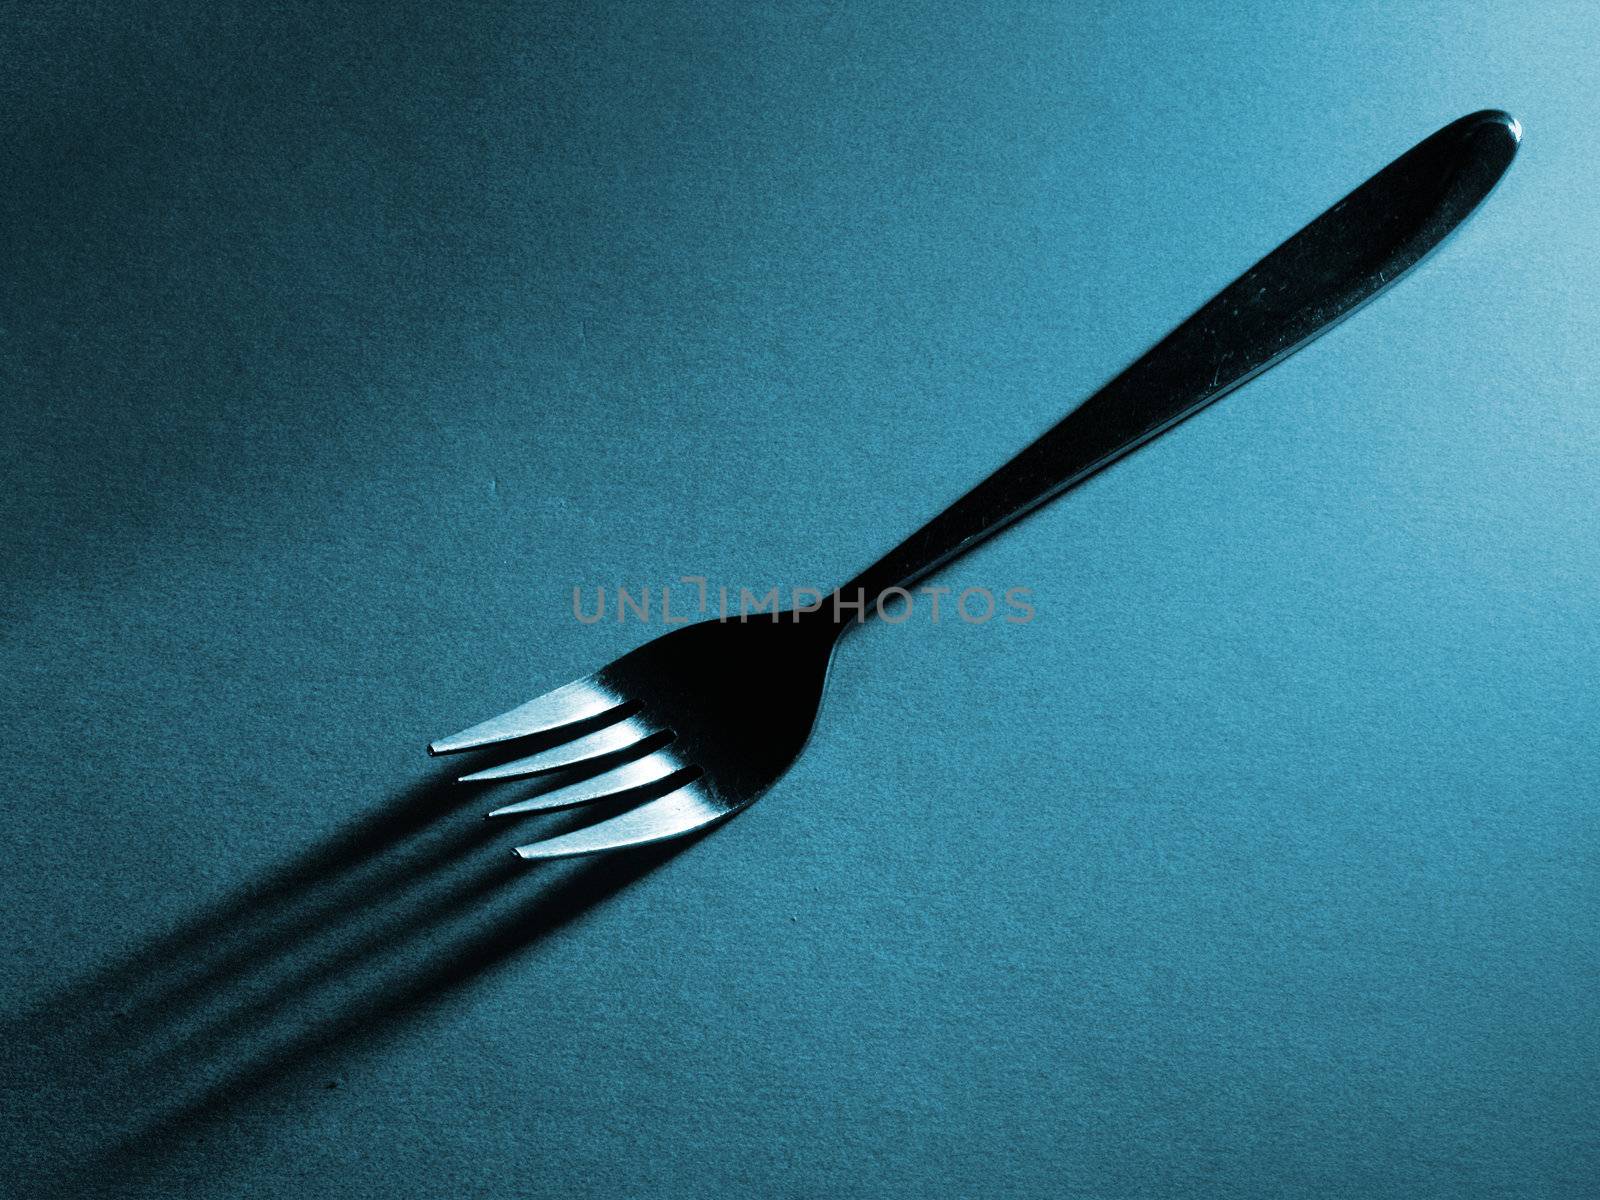 Fork and shadow by tommroch